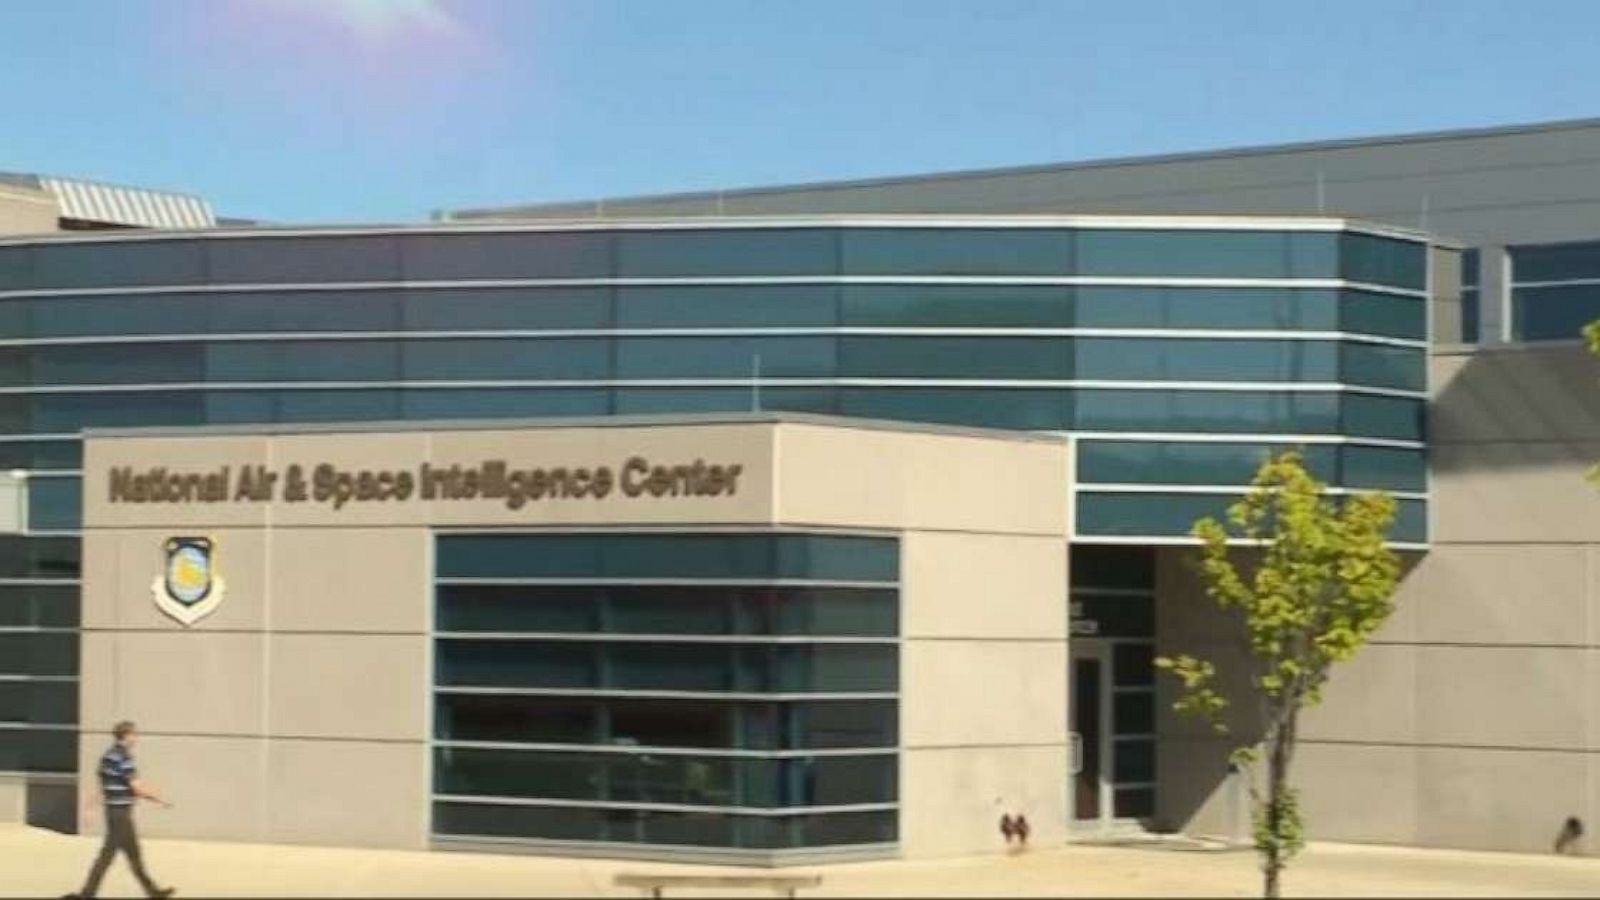 National Air and Space Intel Center